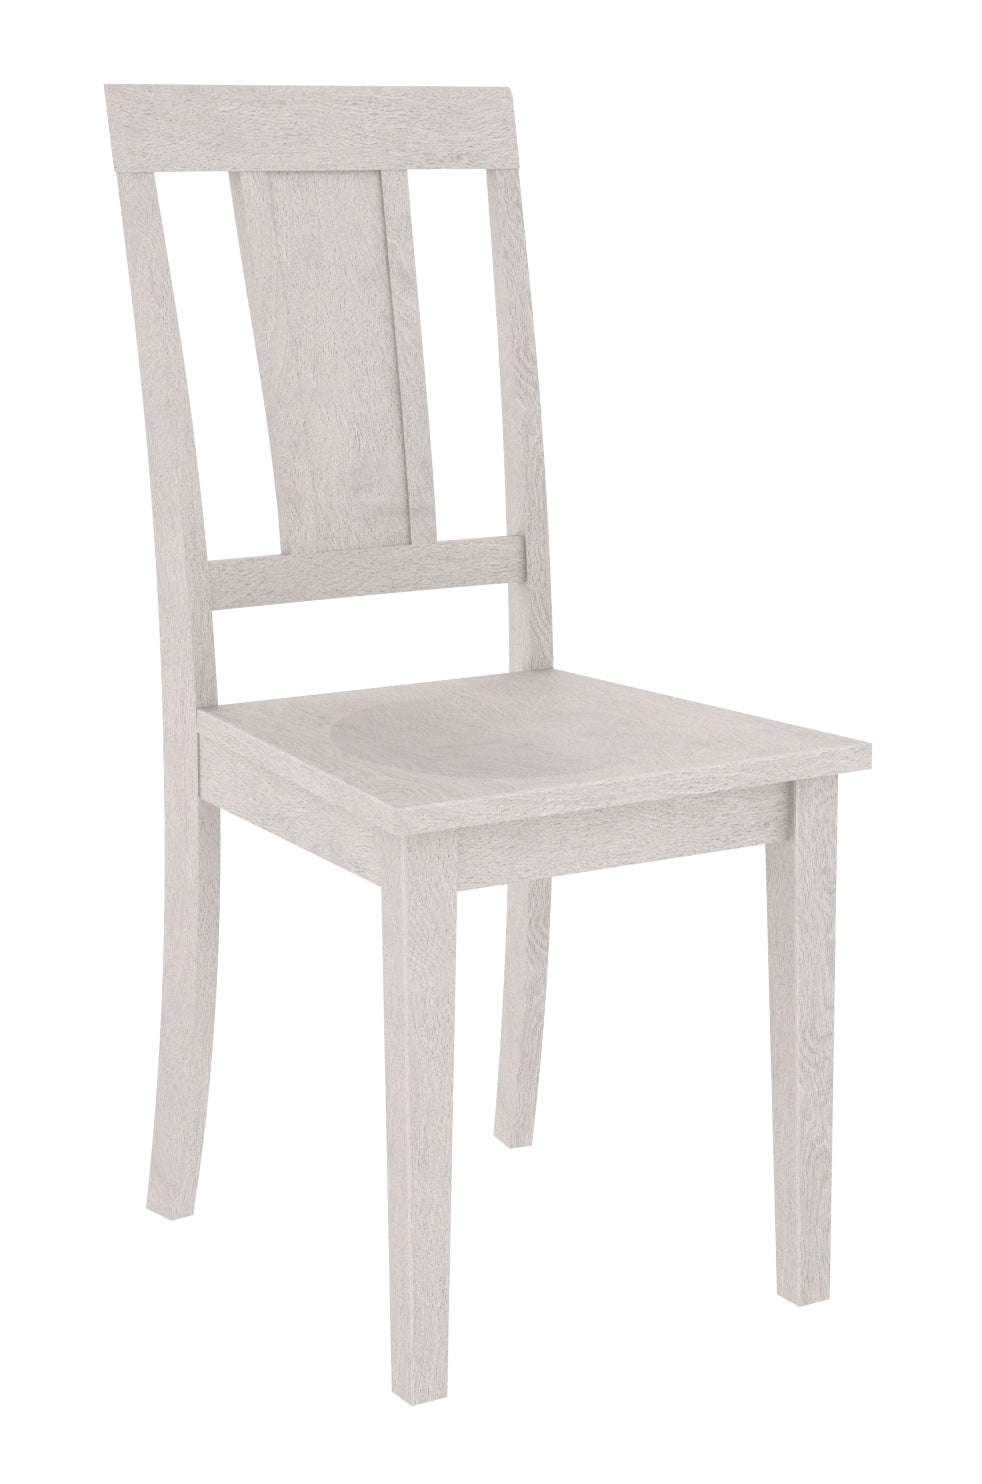 Set of 2 solid rubberwood chairs imitation bleached oak, French manufacture